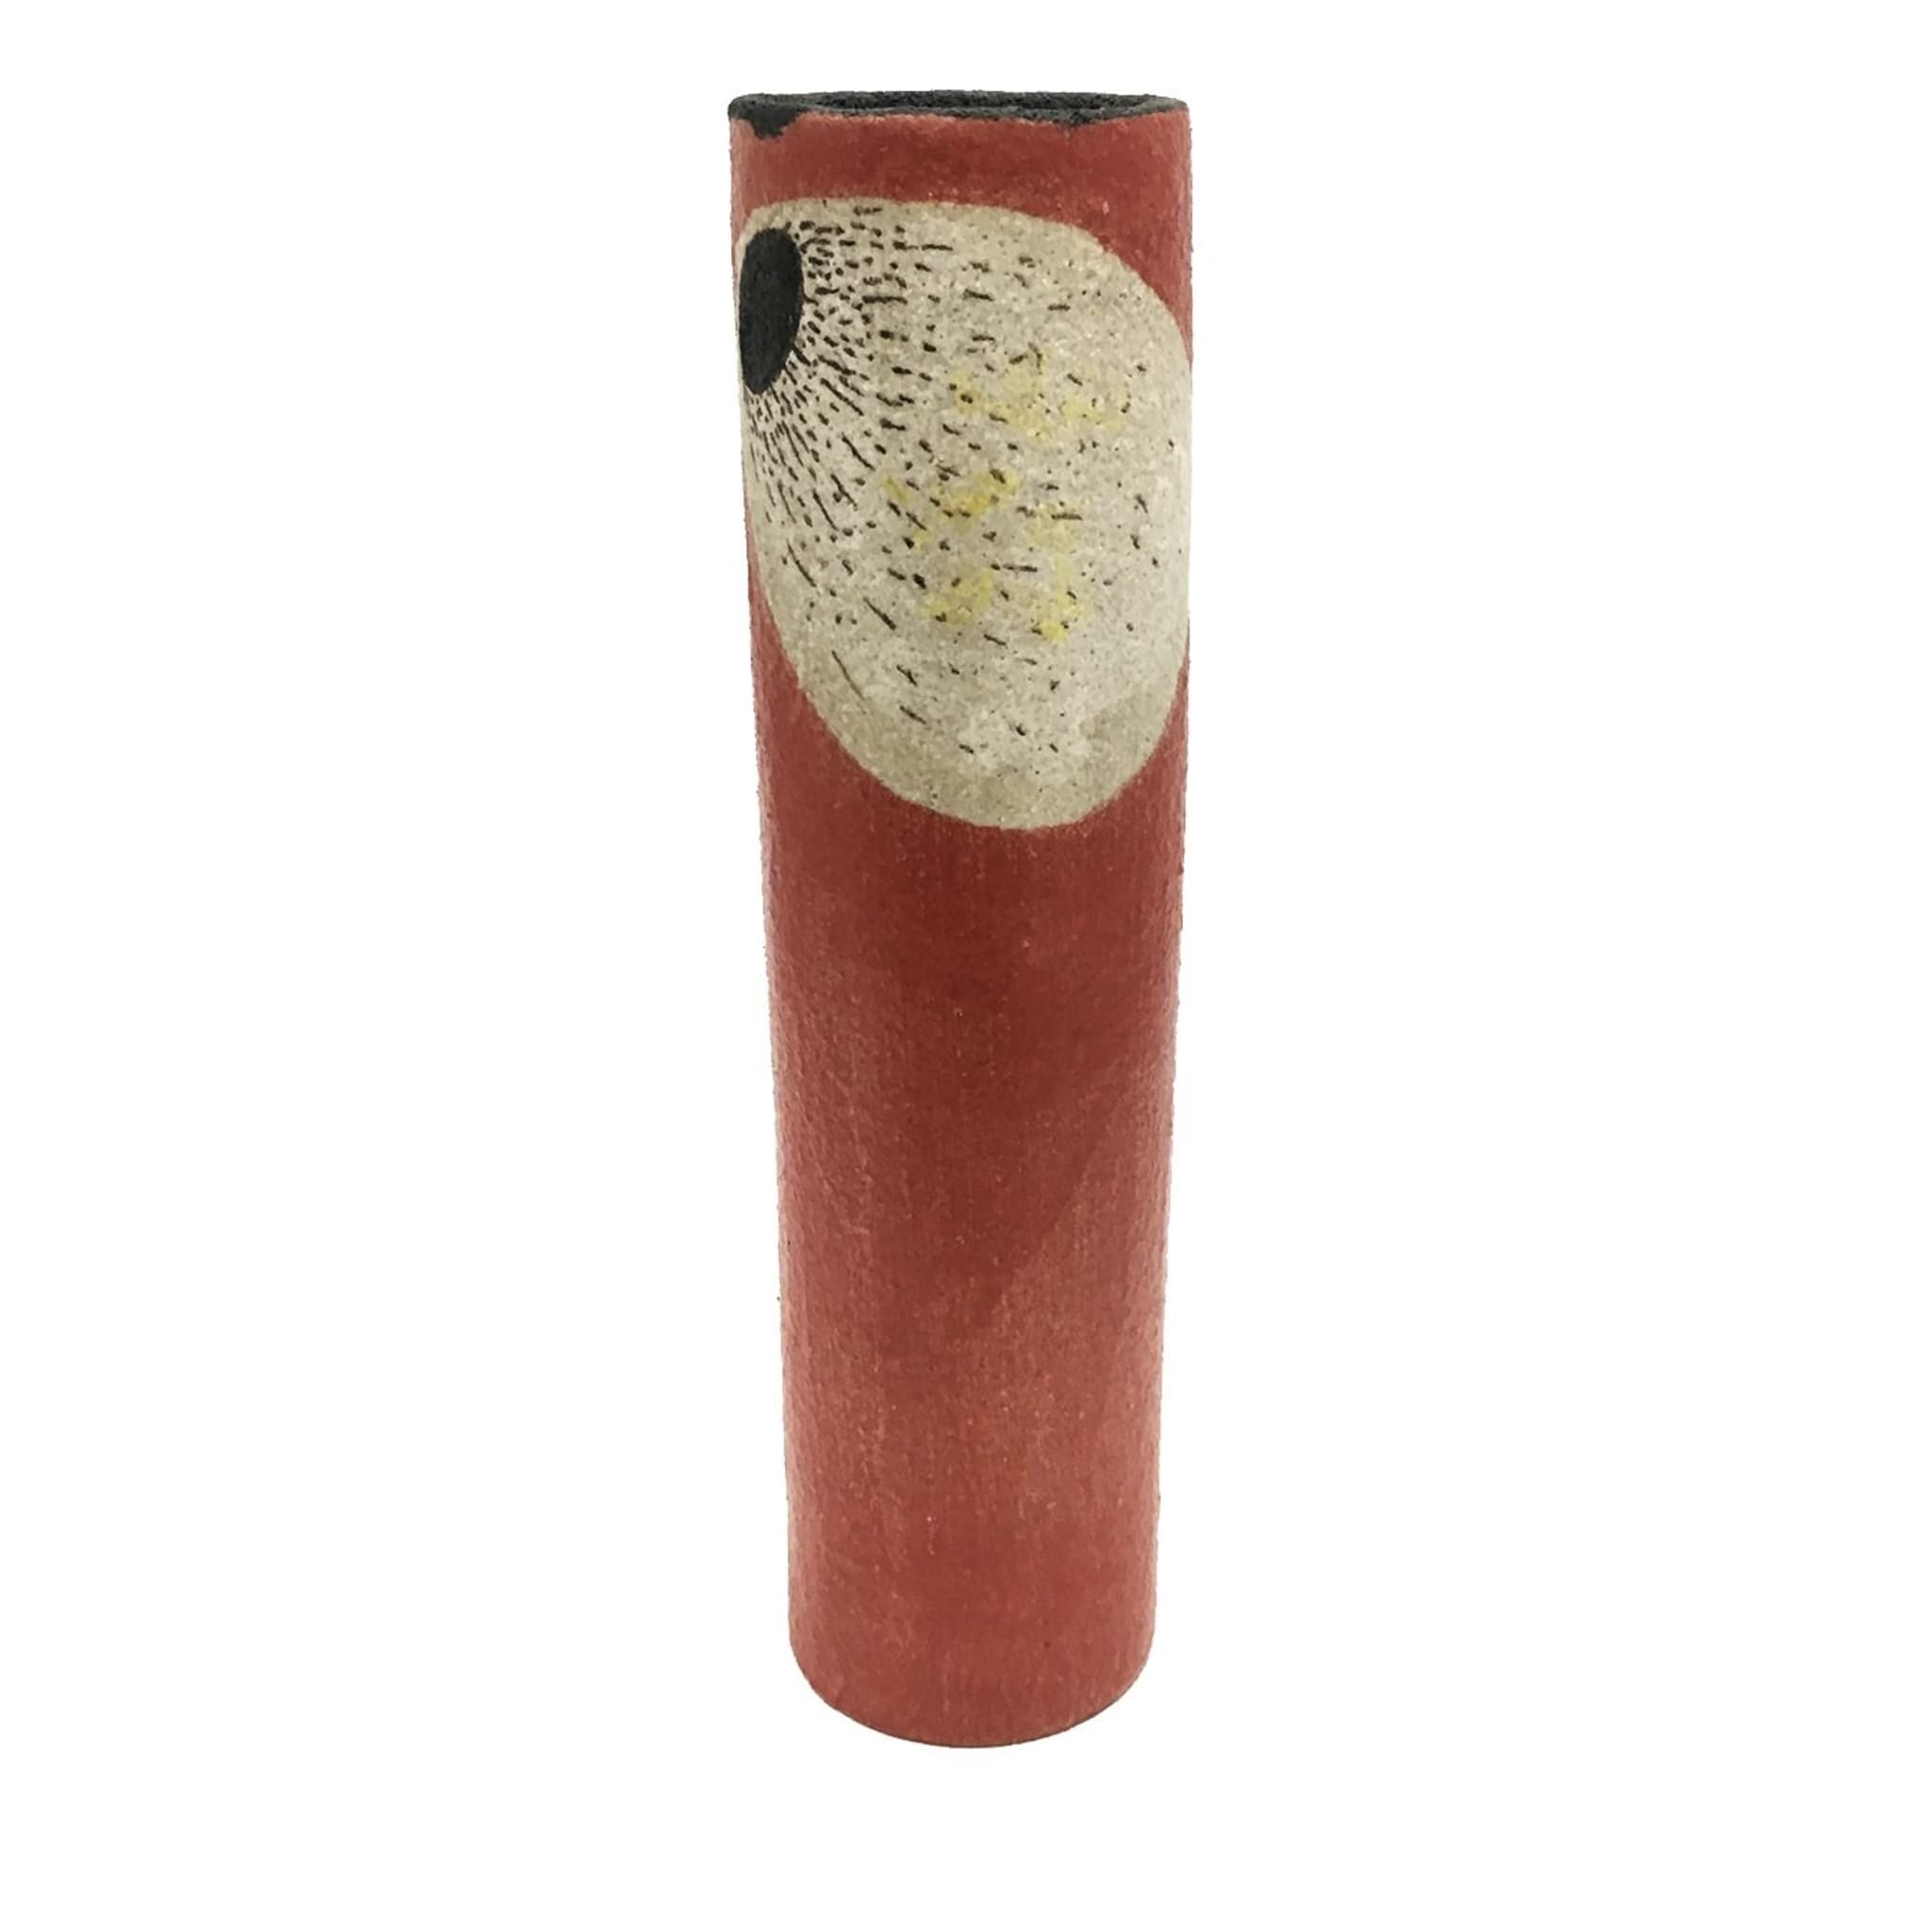 Segno White and Red Tall Vase - Alternative view 1